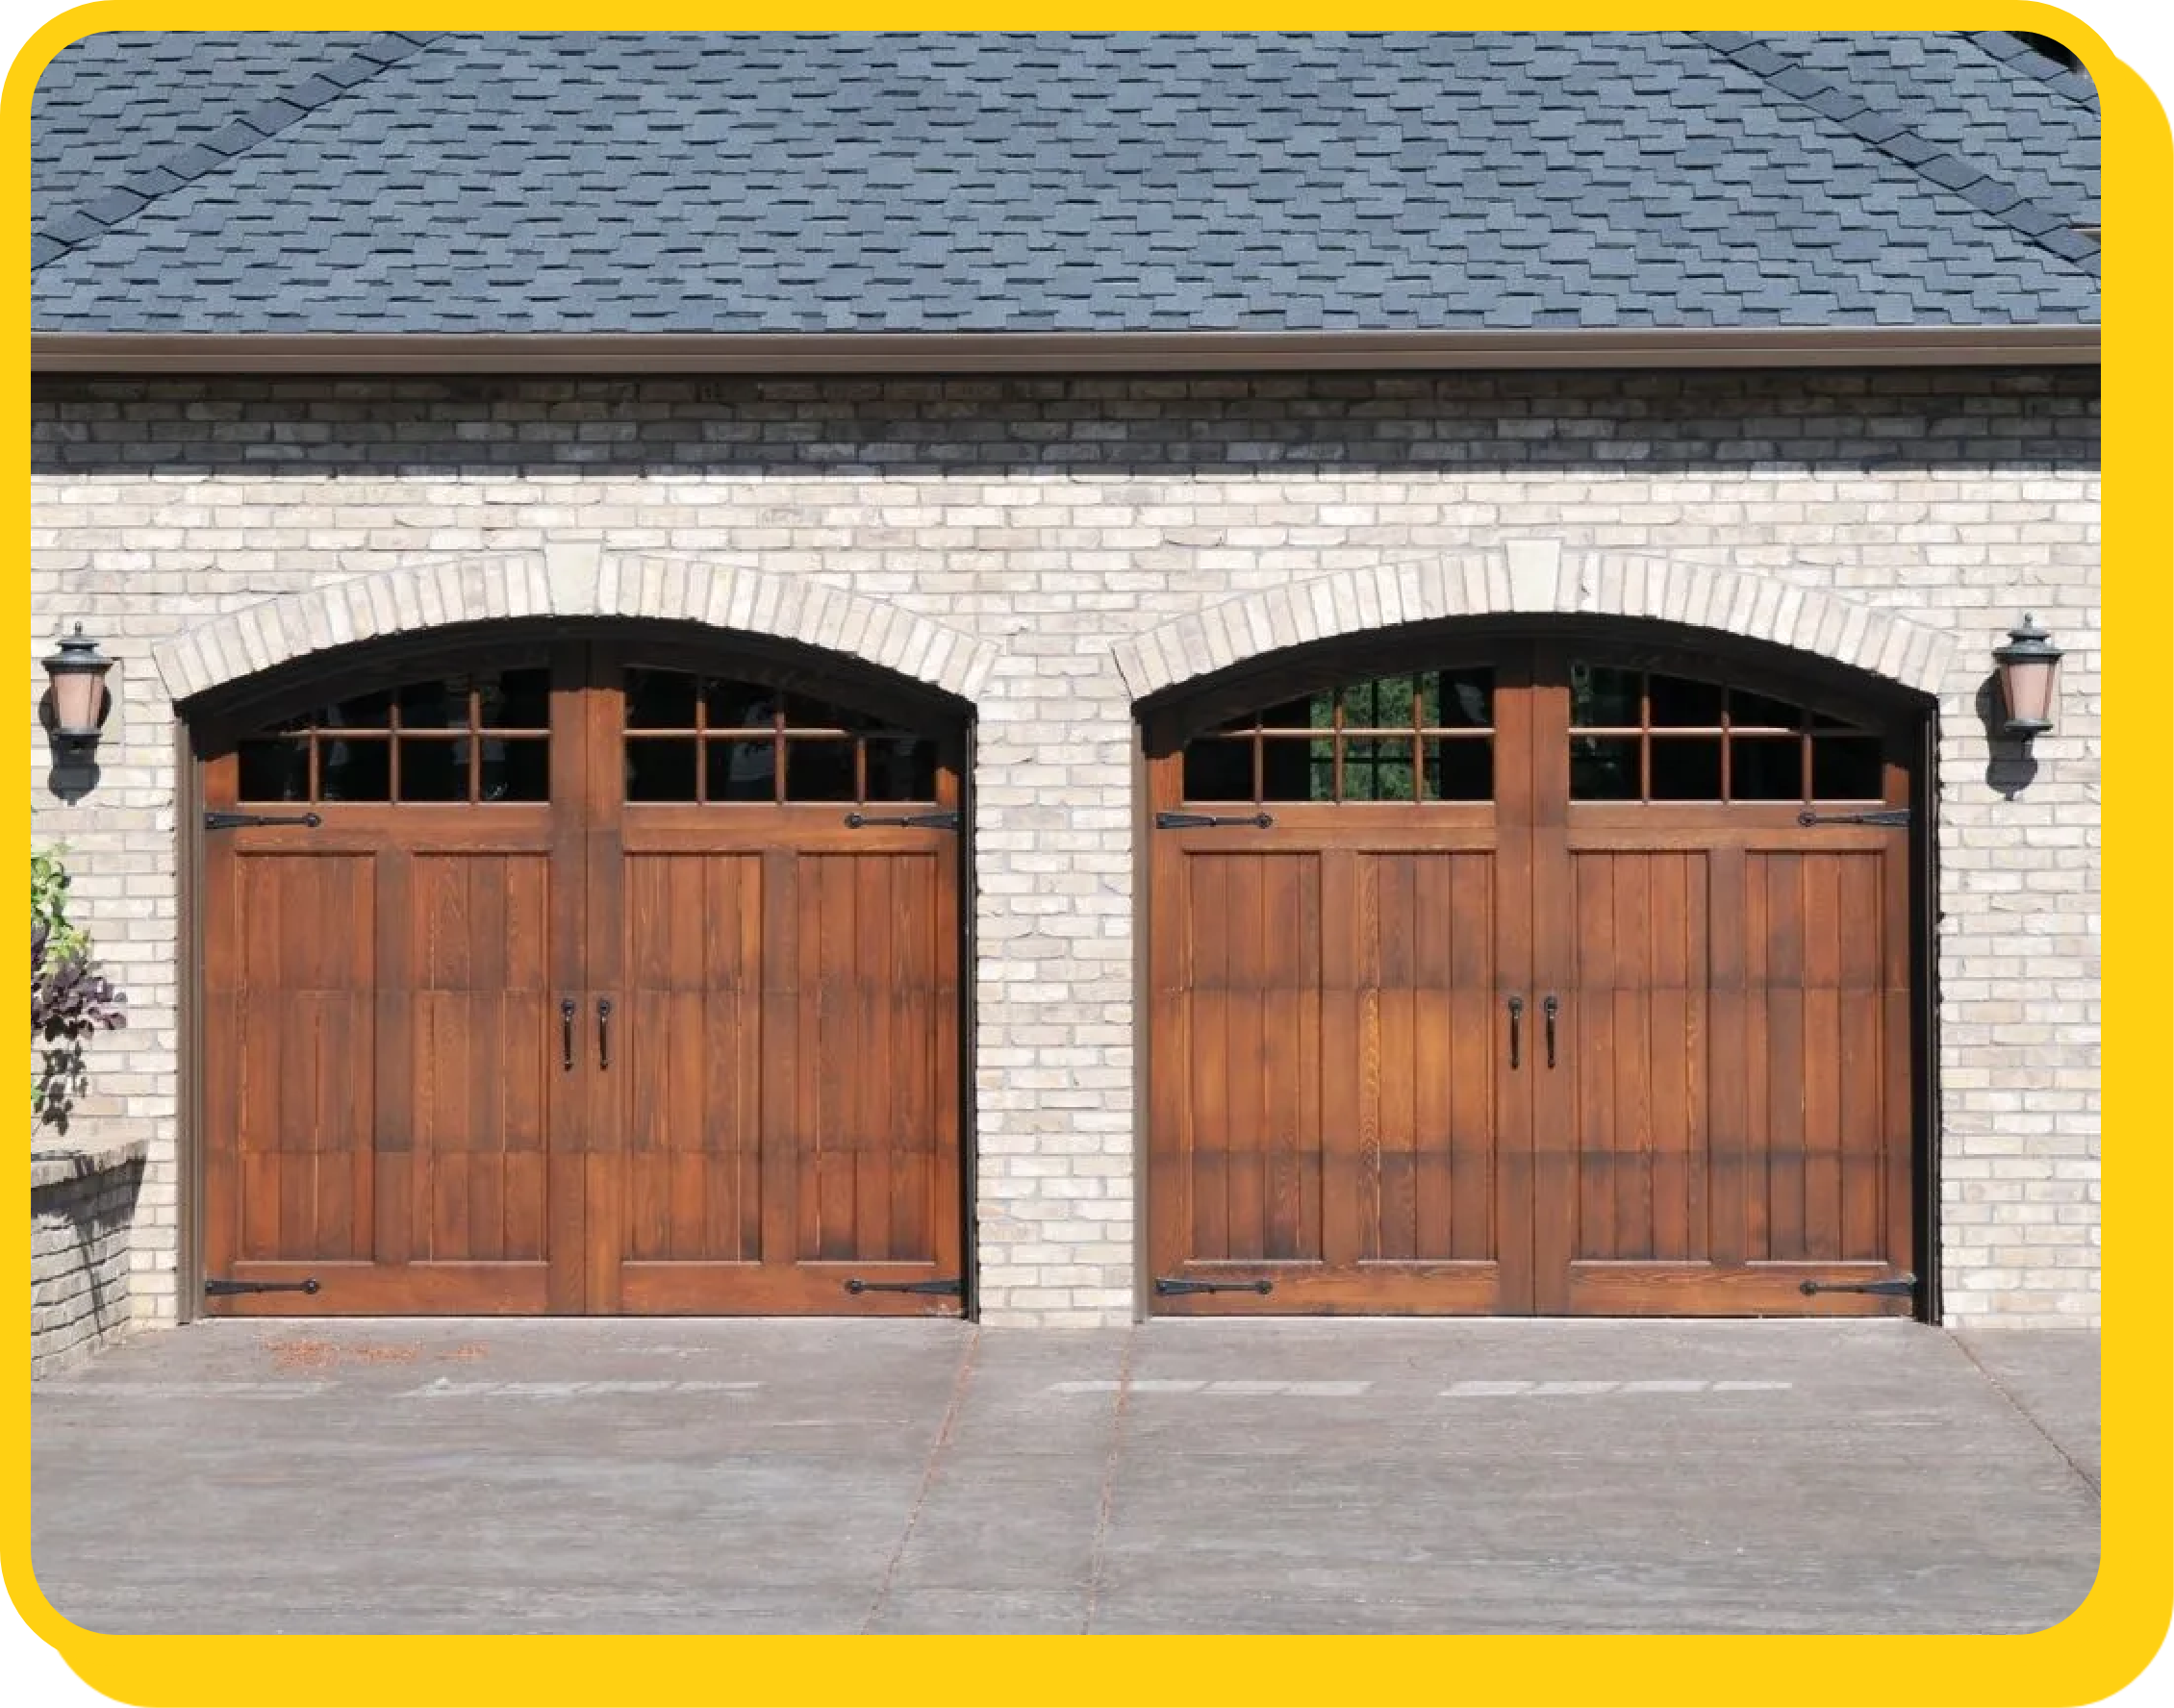 red arched wooden garage doors on a scream brick home